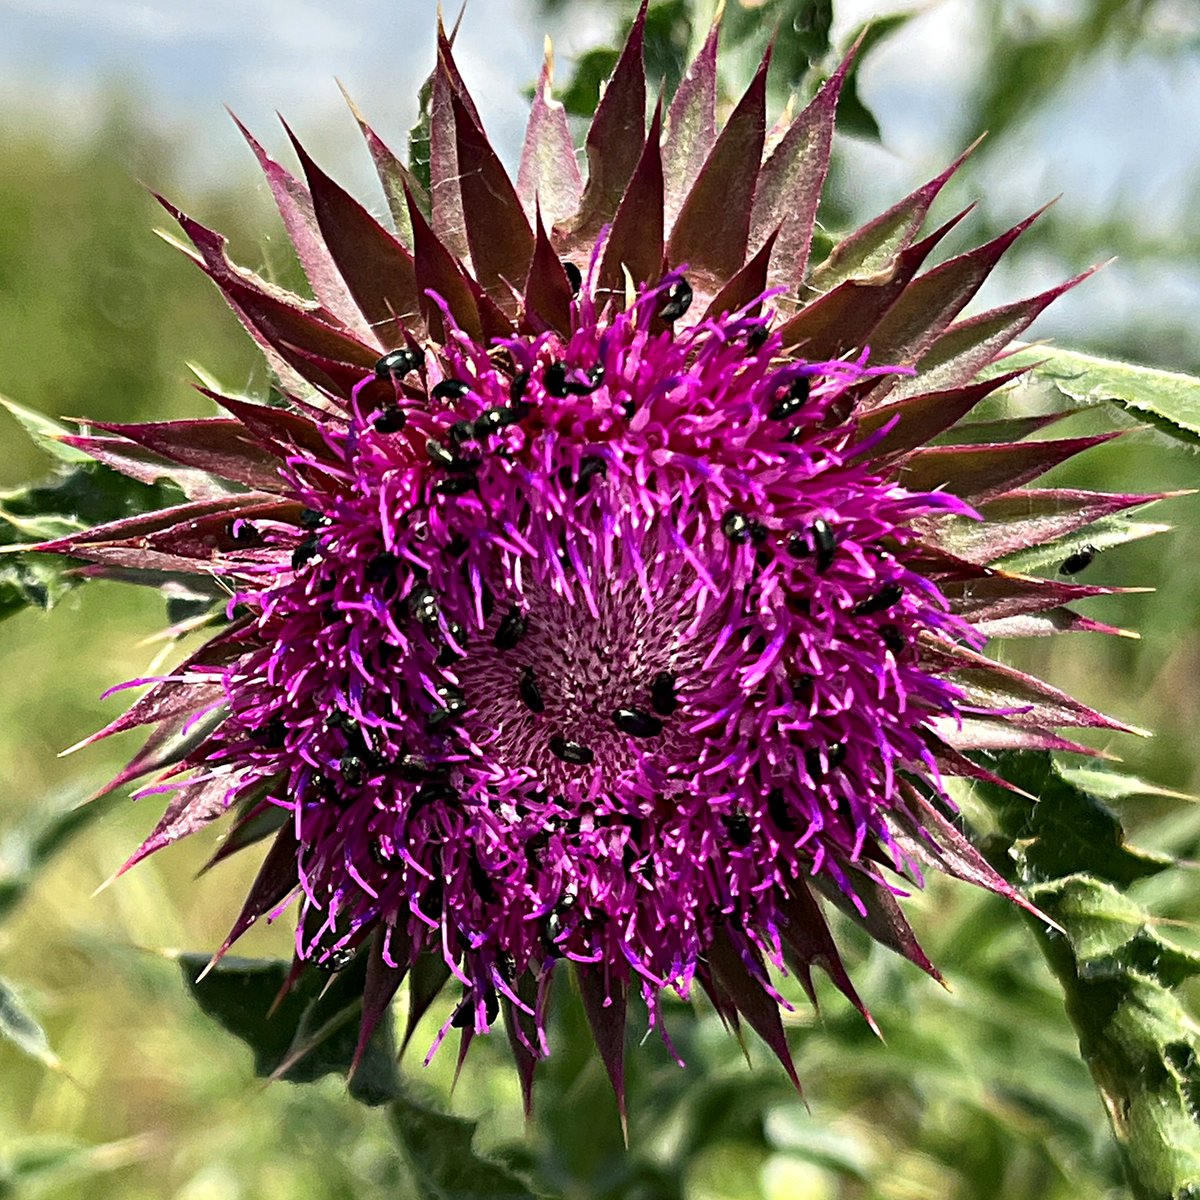 Caption here should be 'Pollen beetles gathering in the Suffolk Breckland' but for #WildflowerHour #thistles challenge let's just call it a Musk Thistle, Carduus nutans.